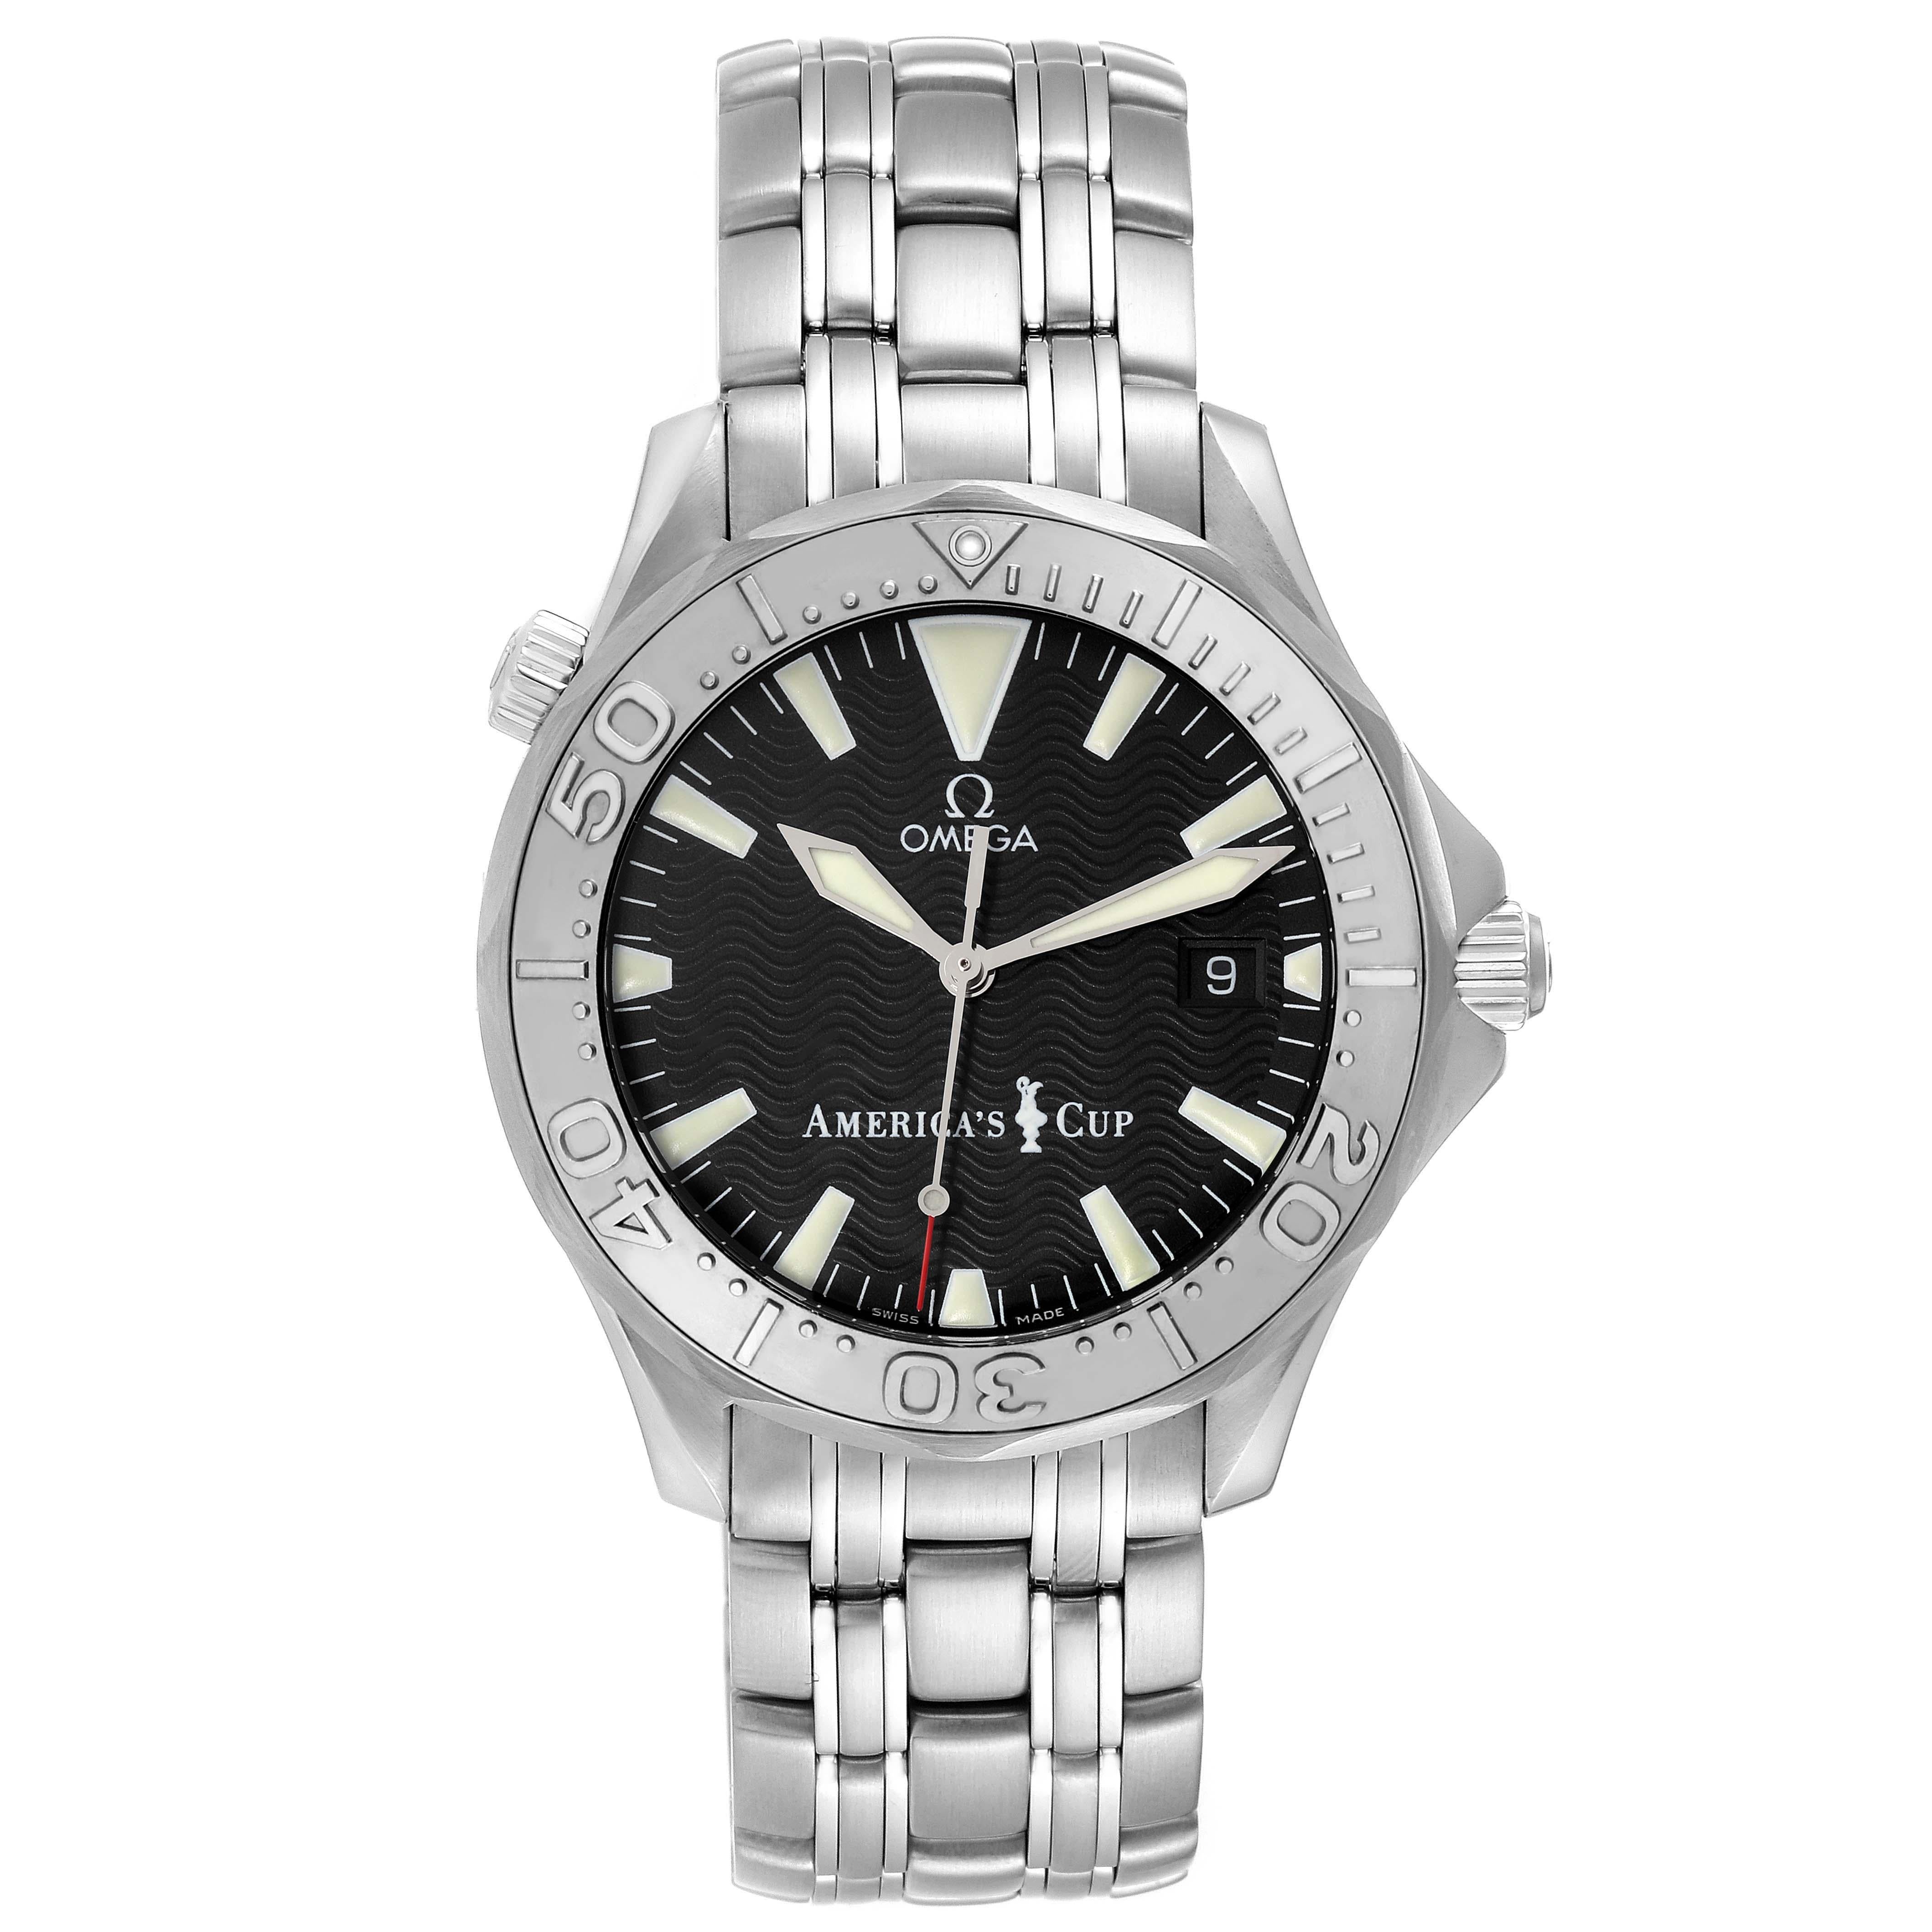 Omega Seamaster Americas Cup Limited Edition Steel Mens Watch 2533.50.00 Box Card. Automatic self-winding movement. Stainless Steel case 41.5 mm in diameter. Omega logo on a crown. 18K white gold unidirectional rotating bezel. Scratch resistant